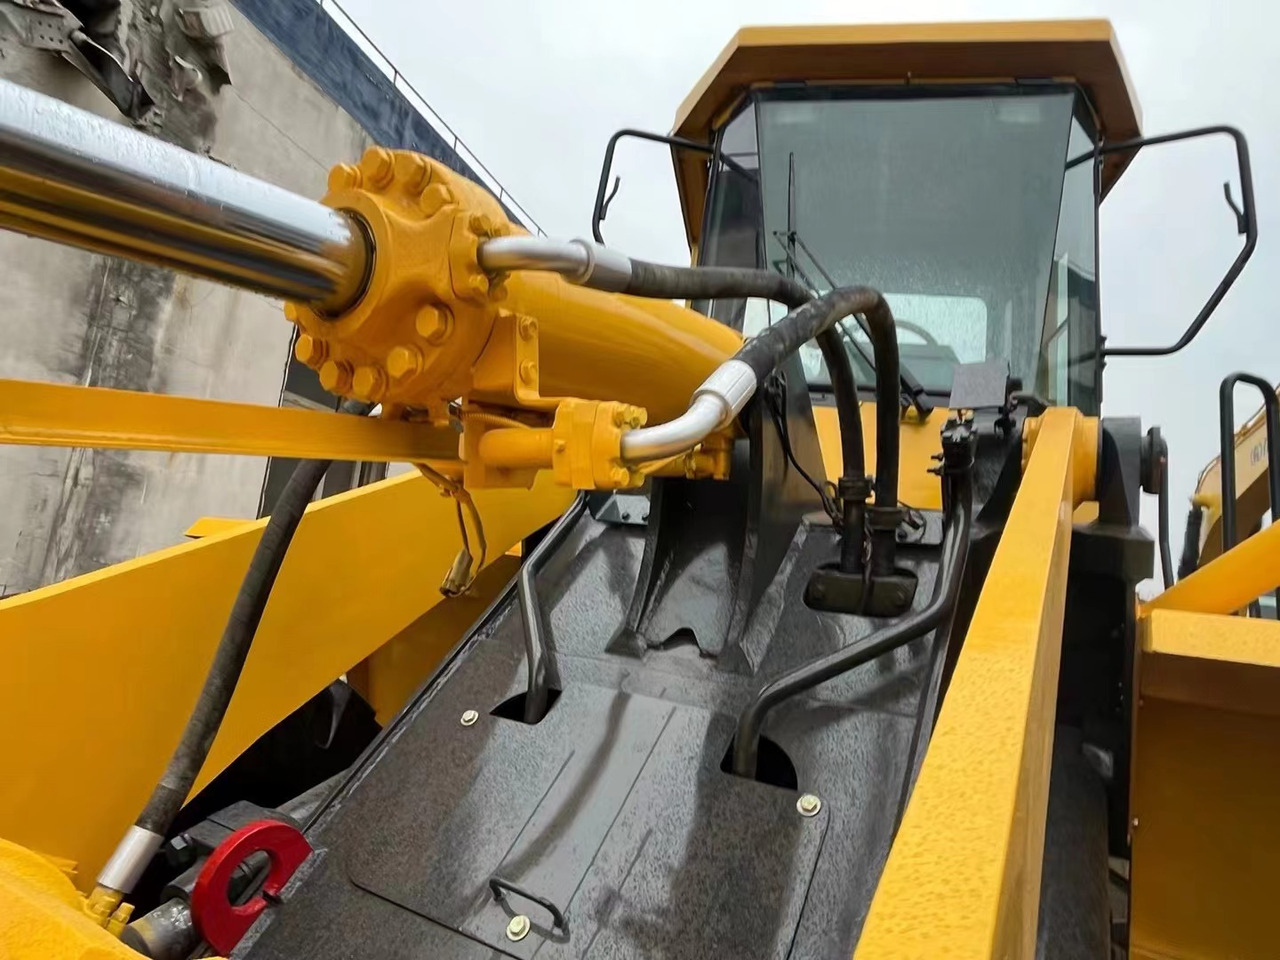 Wiellader KOMATSU WA380 small Used Loader  for sale with cheap price: afbeelding 6